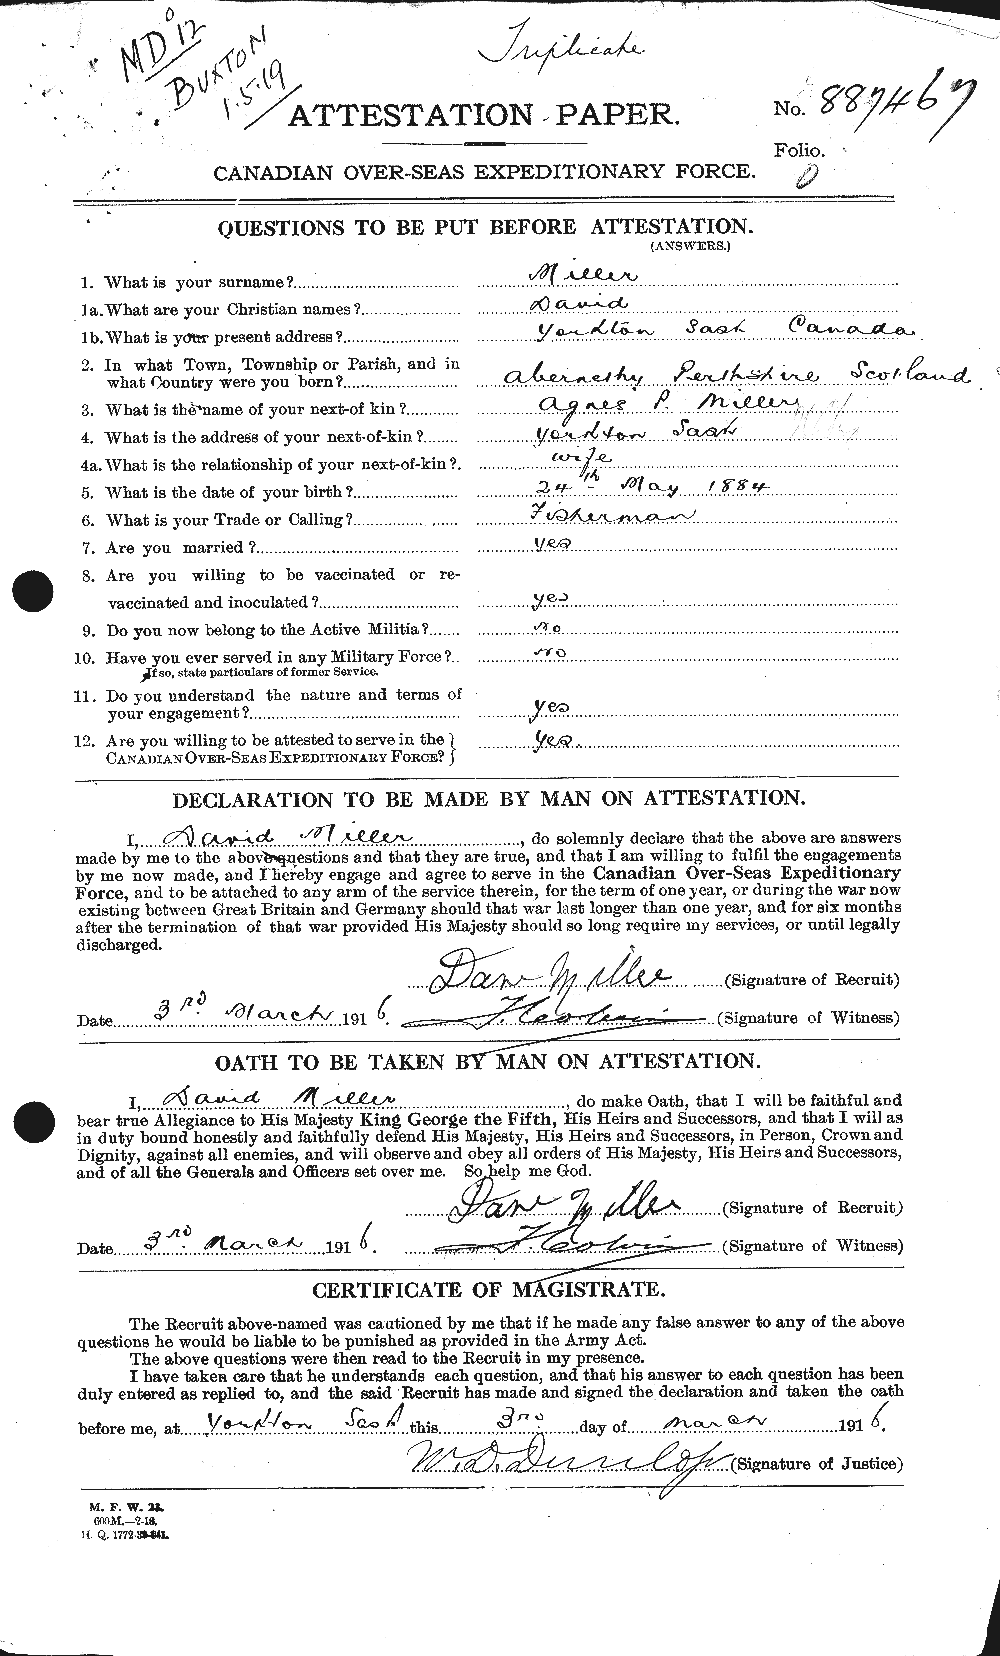 Personnel Records of the First World War - CEF 500414a